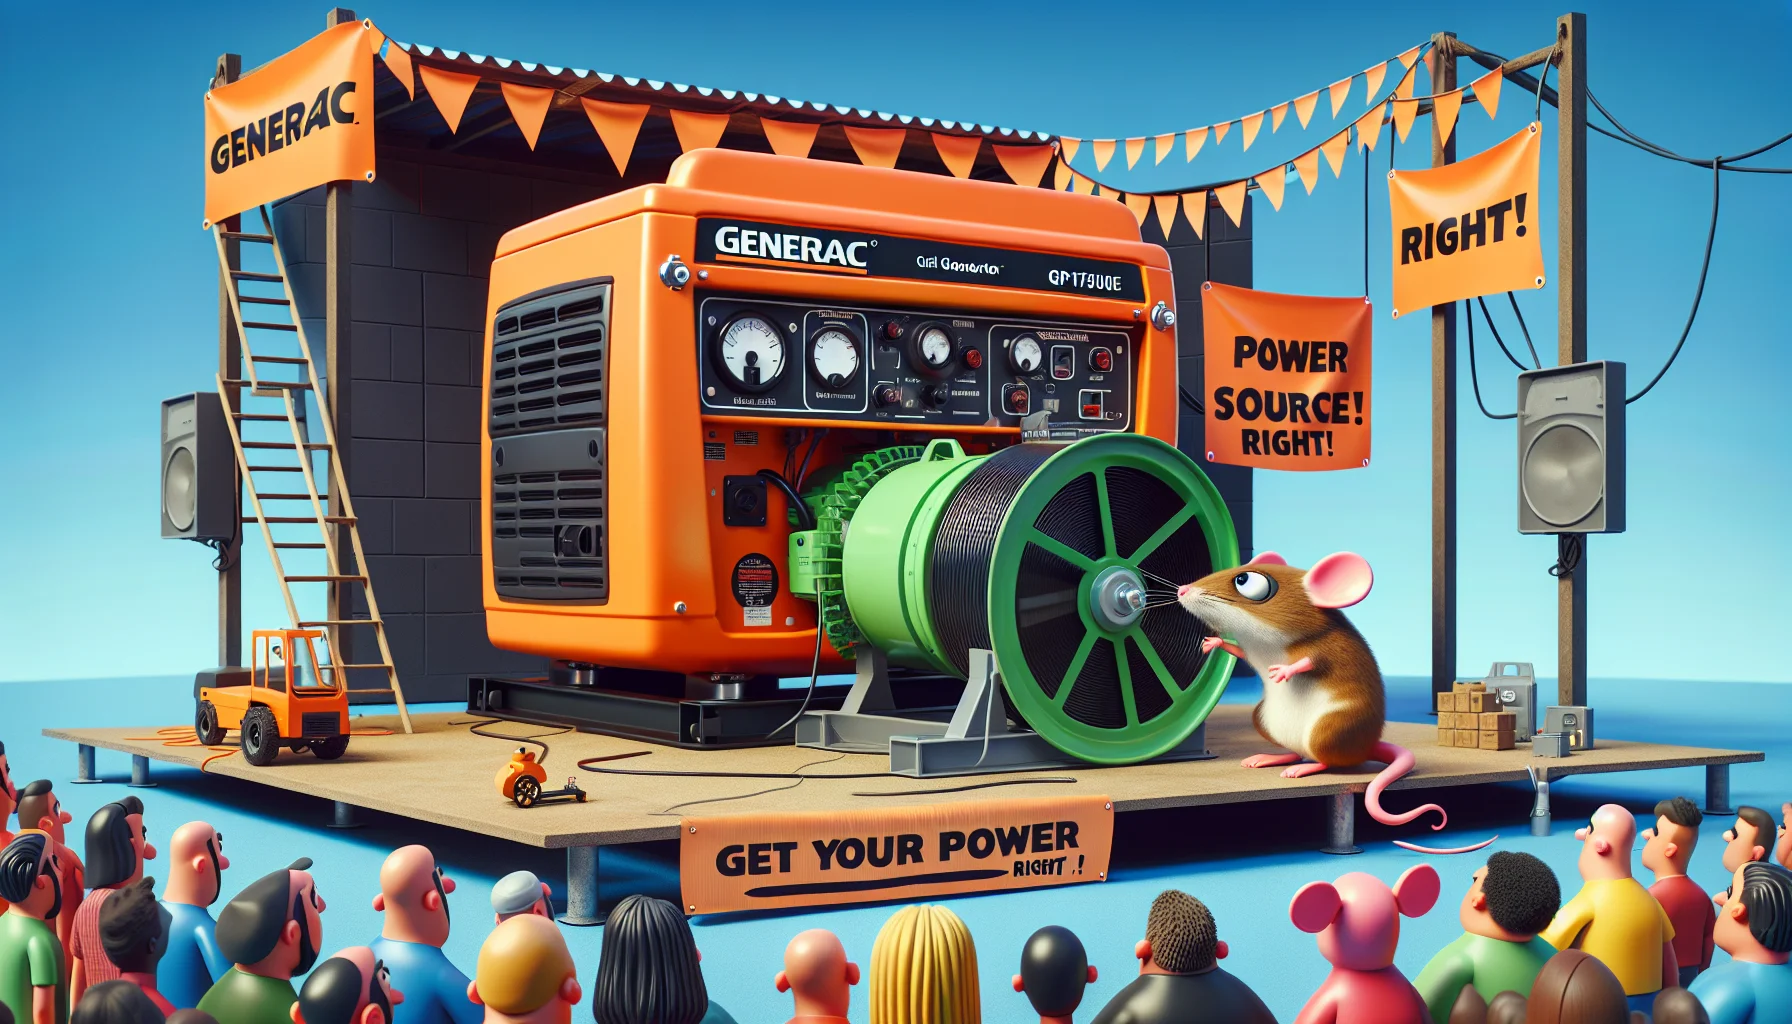 Create a comical scenario featuring a generic large power generator, similar to the style of the Generac GP17500E. In this funny scene, the hefty generator, painted in bright orange, is humorously compared with a small mouse on a wheel, attempting to generate electricity. Both devices are set against an animated crowd of different DESCENT and GENDER watching in mild shock but humor with a banner overhead stating 'Get your power source right!'